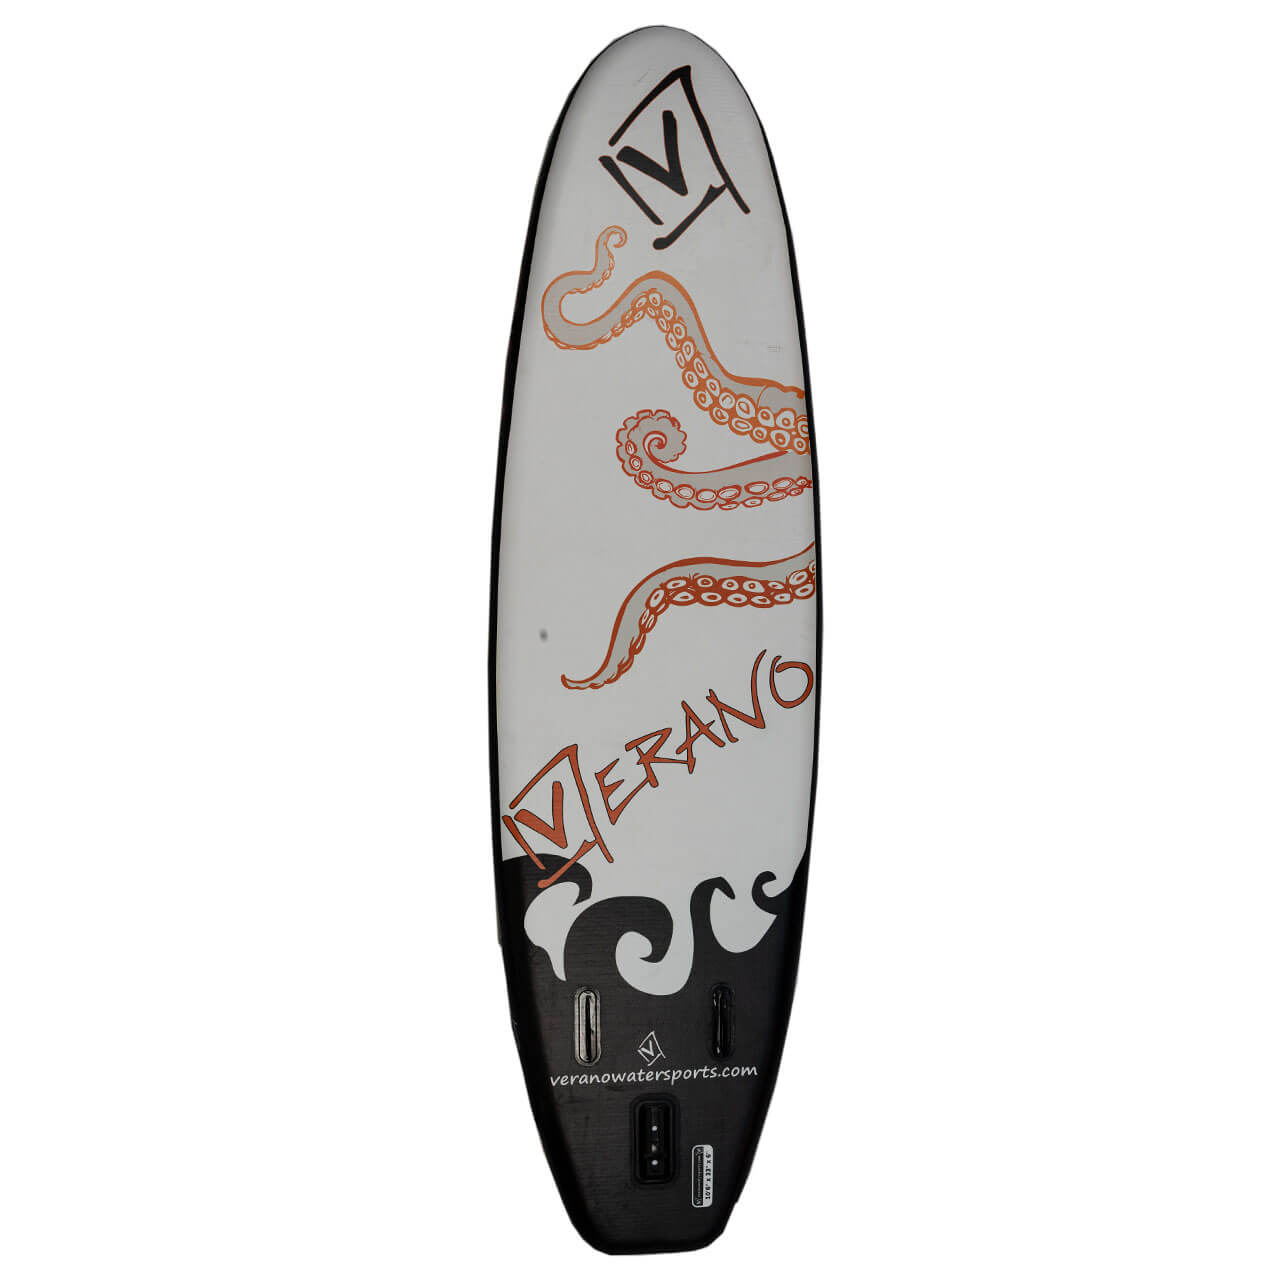 Octopus SUP 10.6 Allround Inflatable Stand Up Paddle Board - Verano